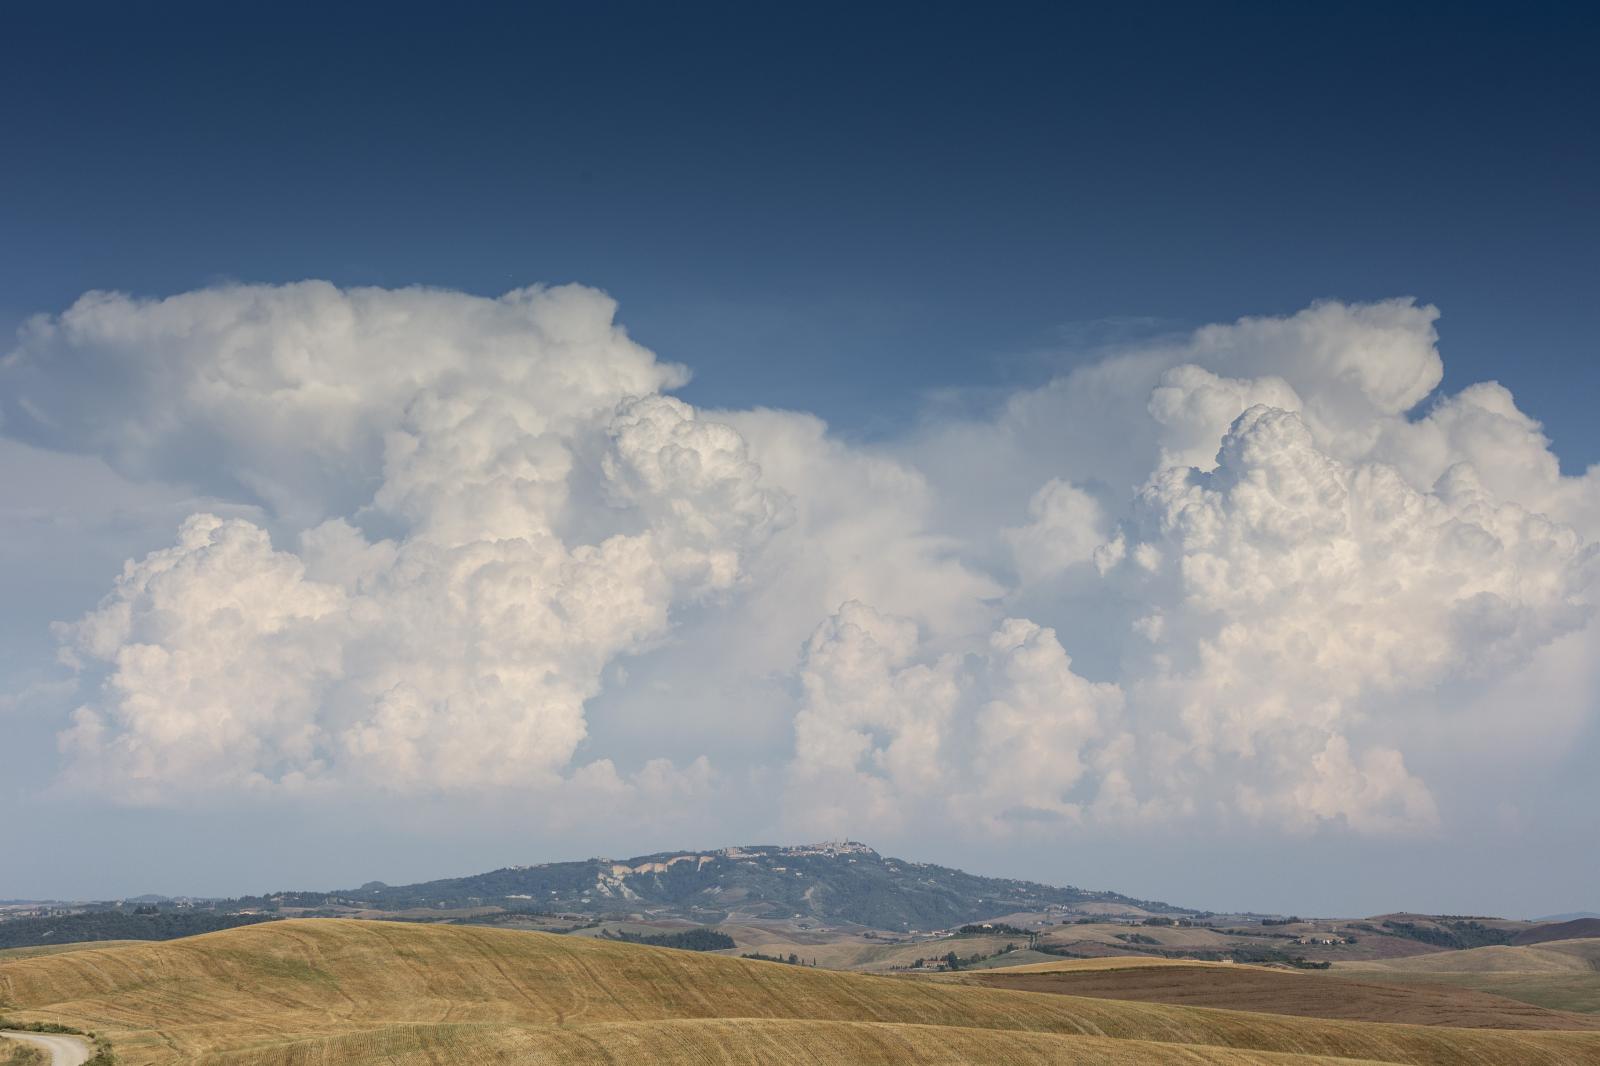 Storm over Volterra | Buy this image